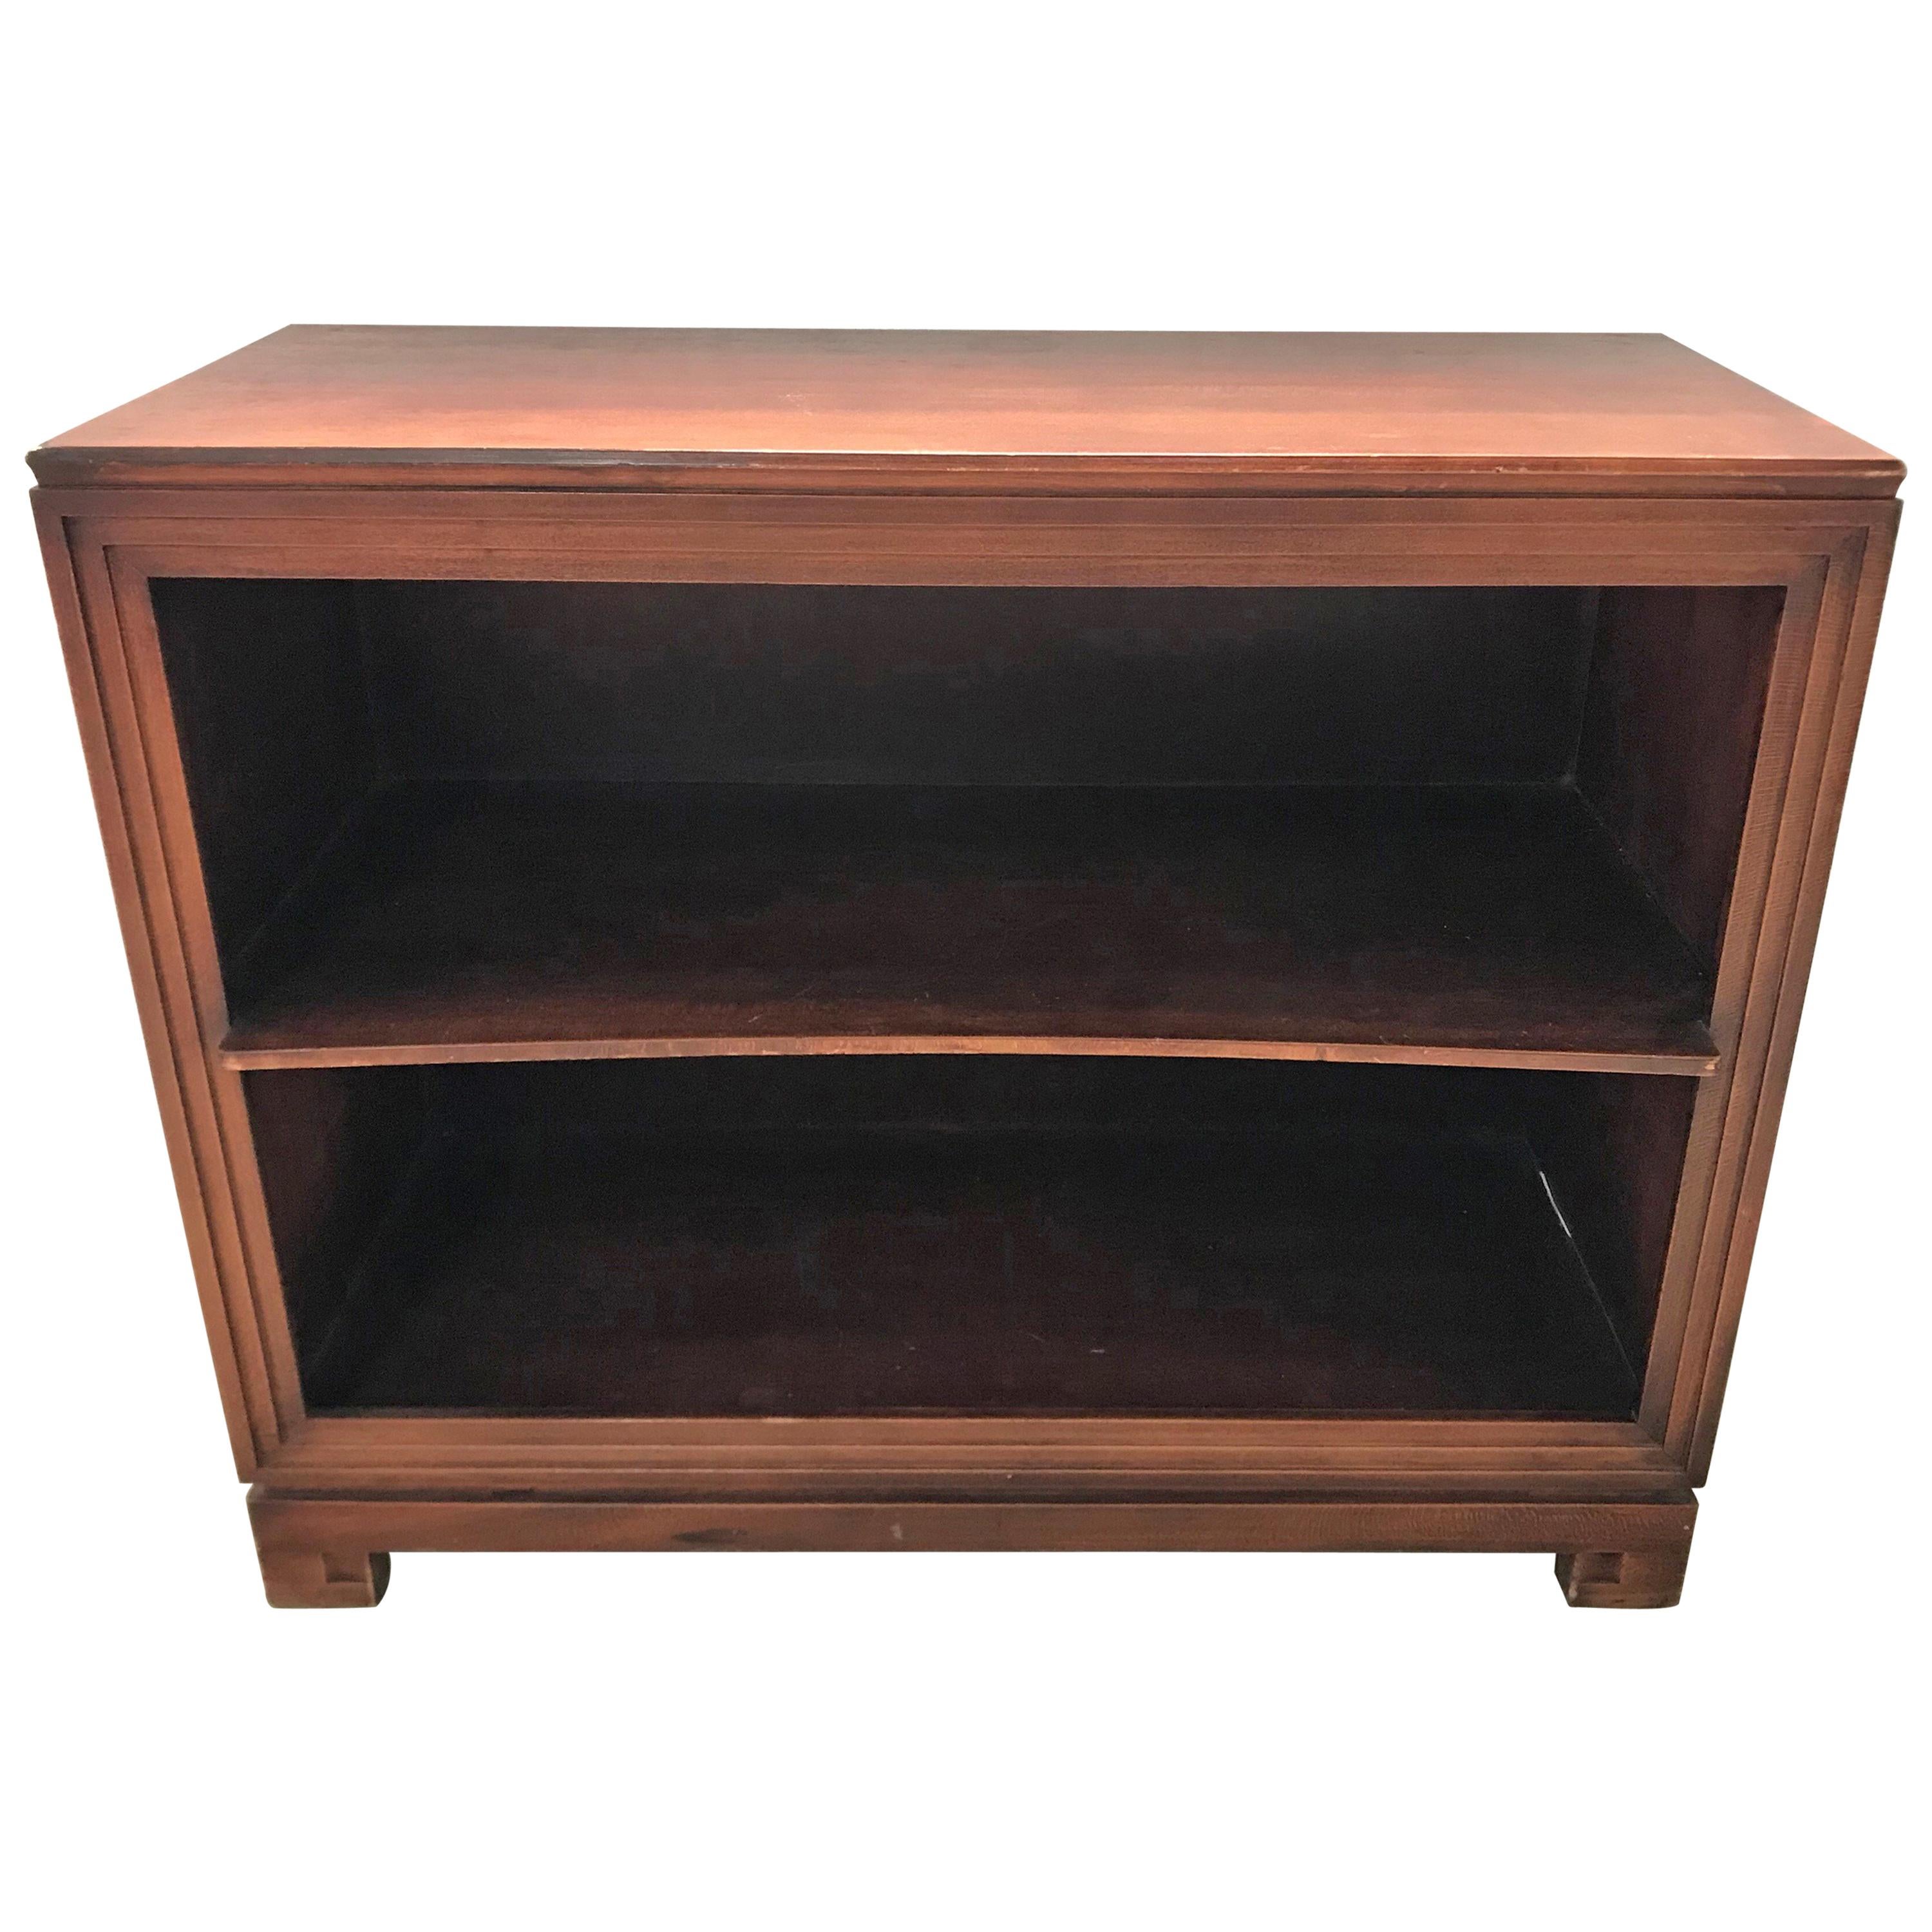 Pair of Paul Frankl Petite Mahogany Bookcases for Johnson Furniture Co.